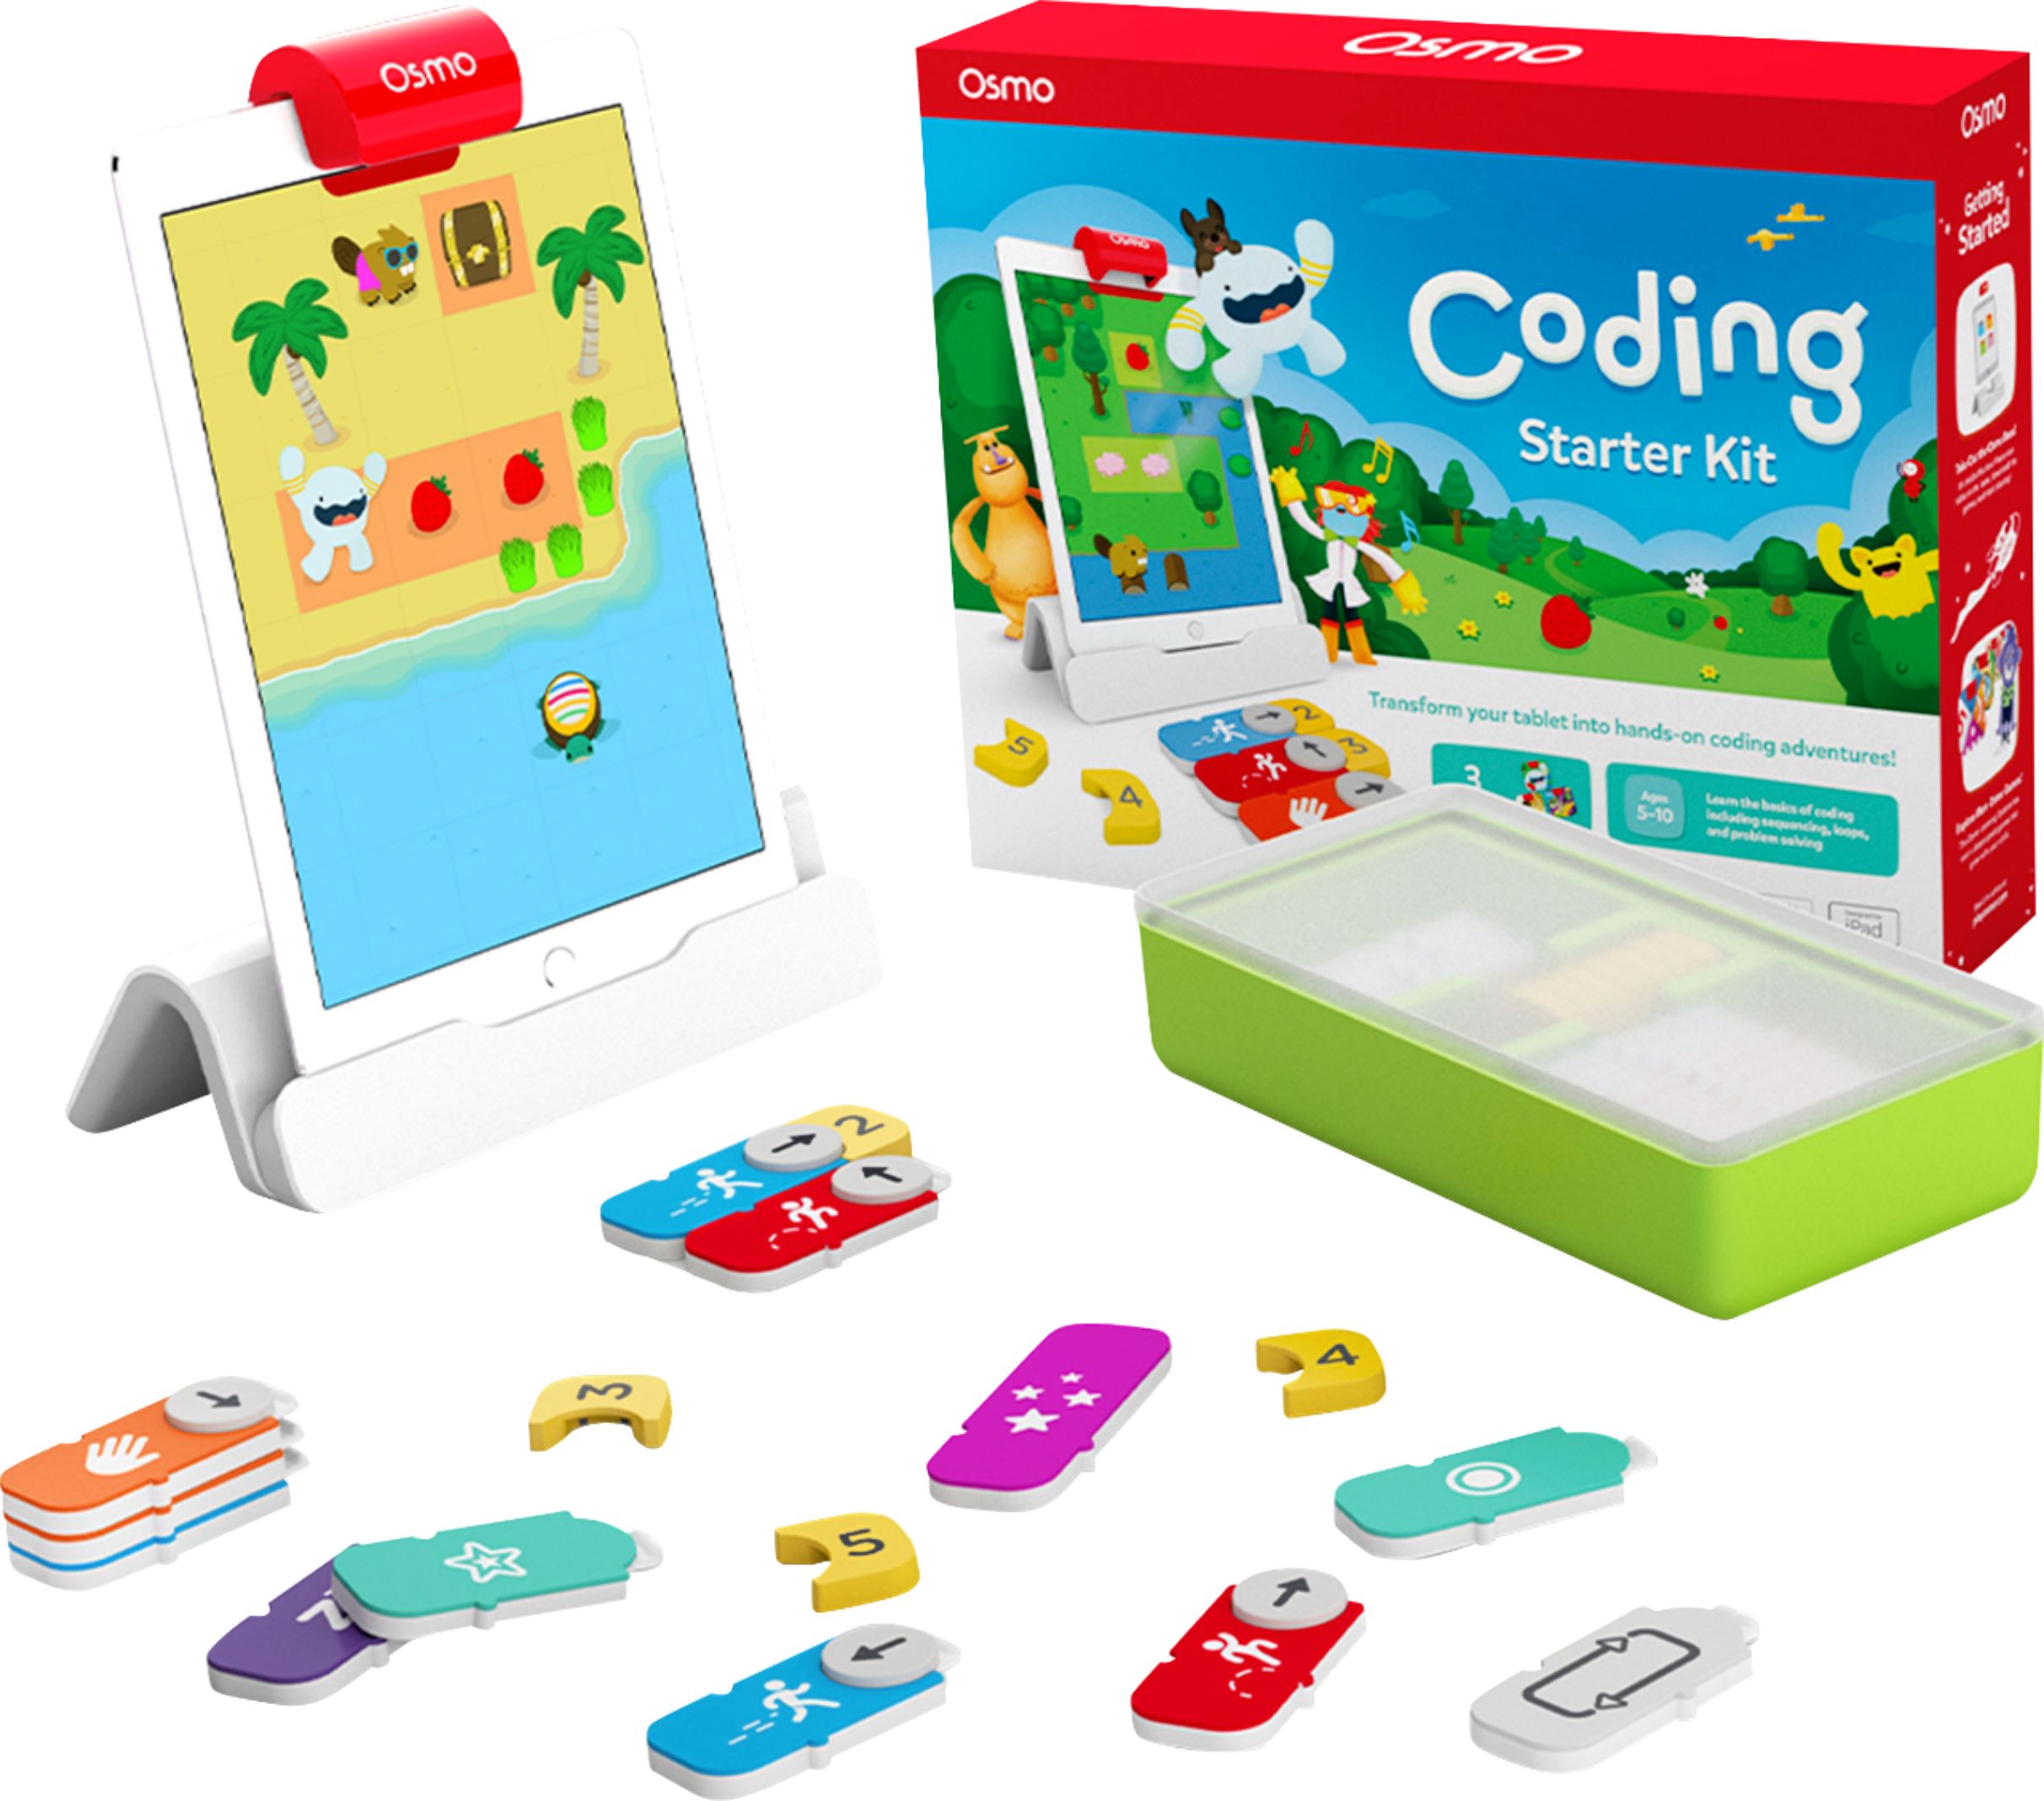 Osmo Coding Starter Kit for iPad - Ages 5-12 -...